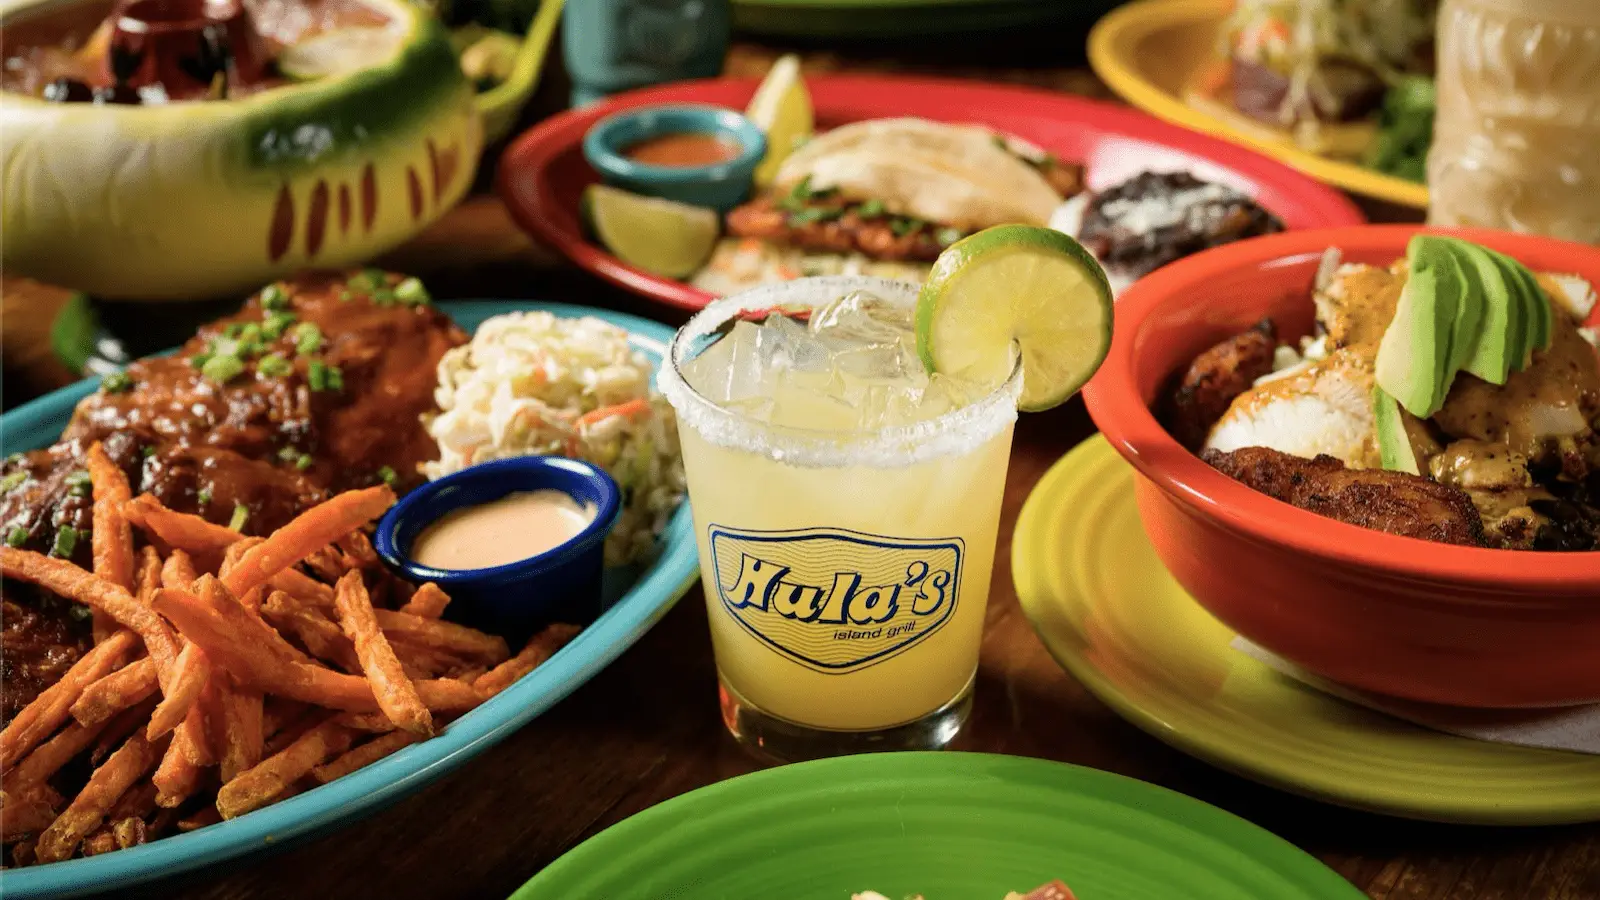 A table filled with various dishes, including sweet potato fries with dip, a bowl of rice topped with avocado and other vegetables, another plate with coleslaw and ribs, and a glass of a yellow drink garnished with a lime slice. For the best lunch in the Monterey Peninsula, look for the "Hula's" logo on the glass.